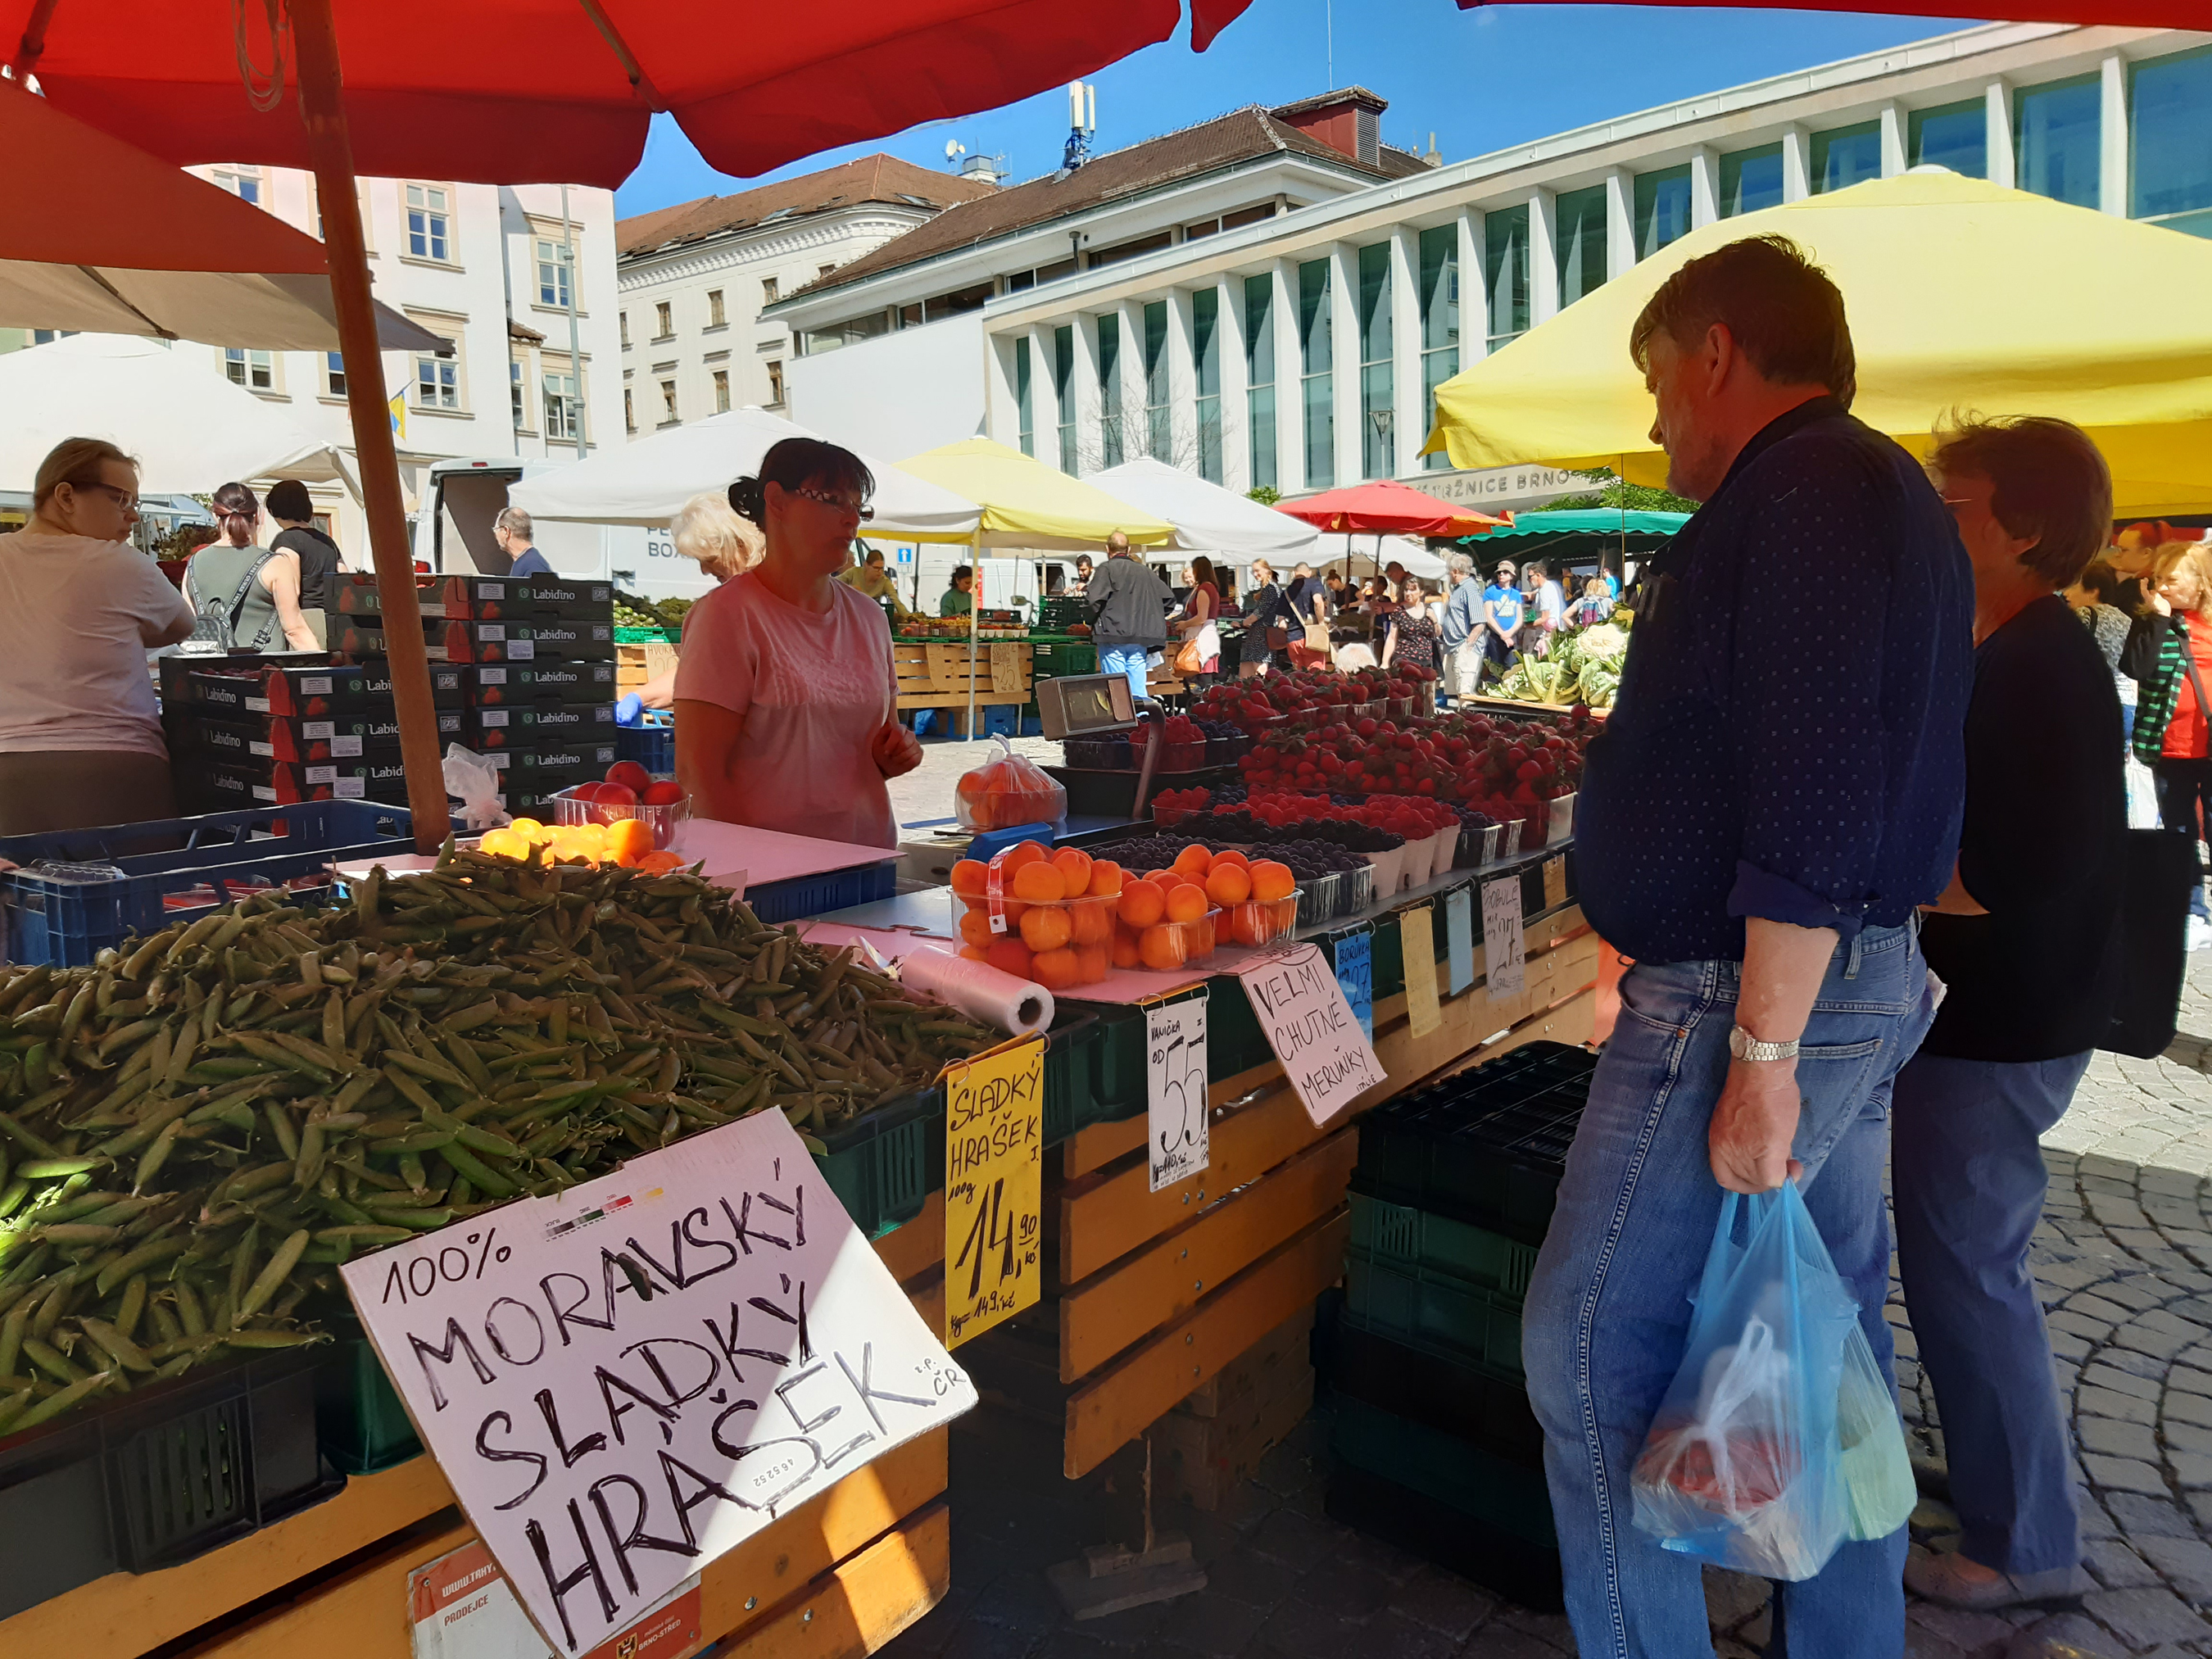 Farmers and stallholders sell their fruit, veg and flowers at a daily market in the centre of Brno (Chris Wiltshire/PA)